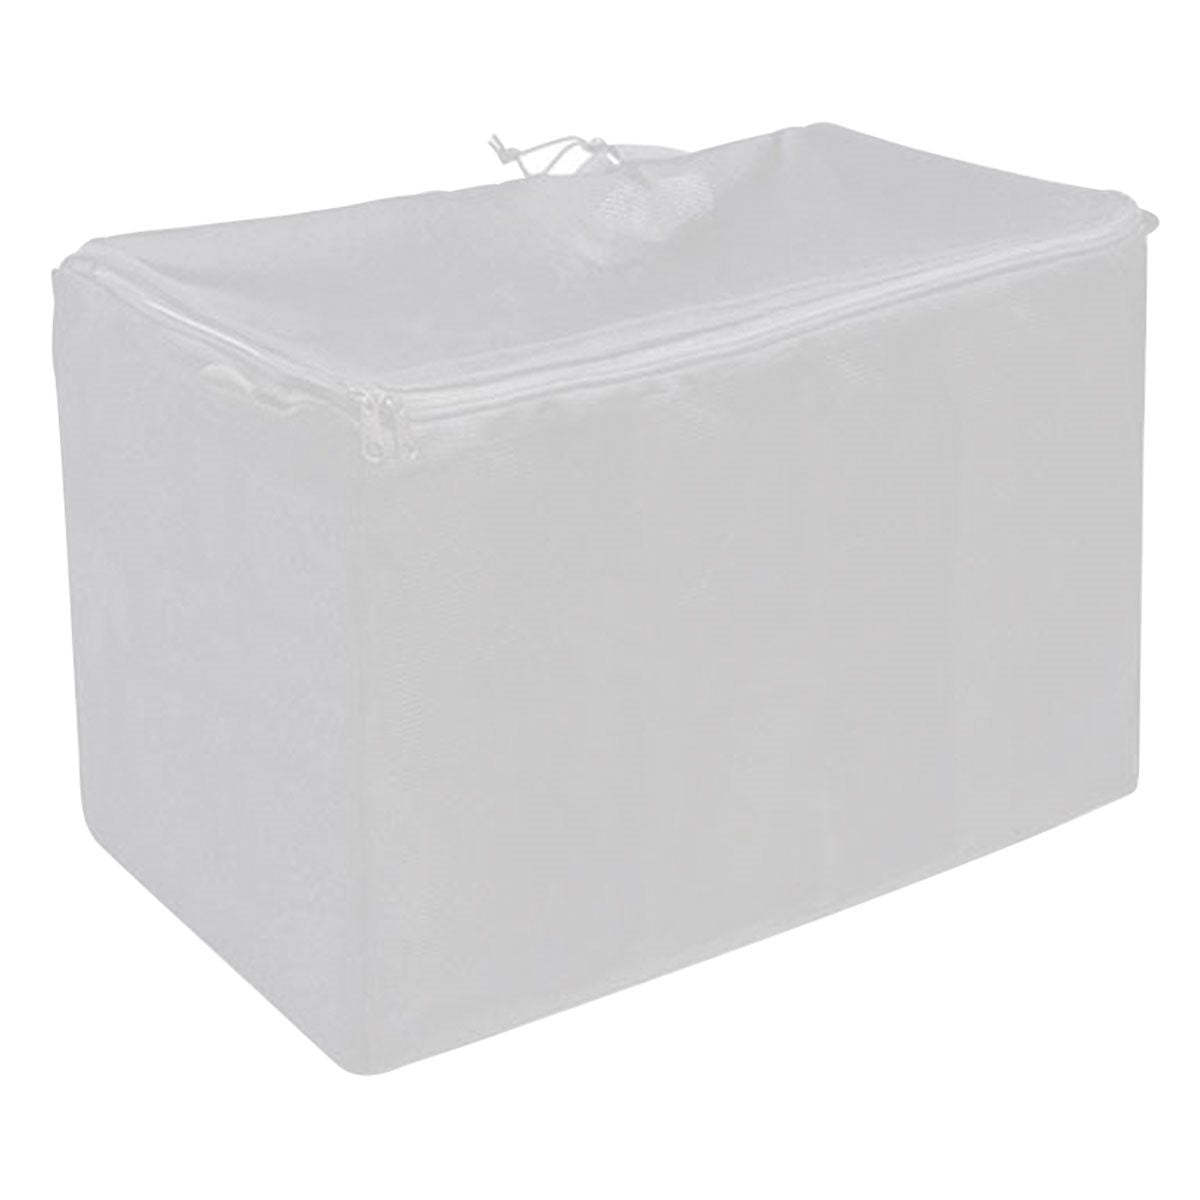 Product Image:Twister T2 Filter Bag White 200 Mesh 70 Micron